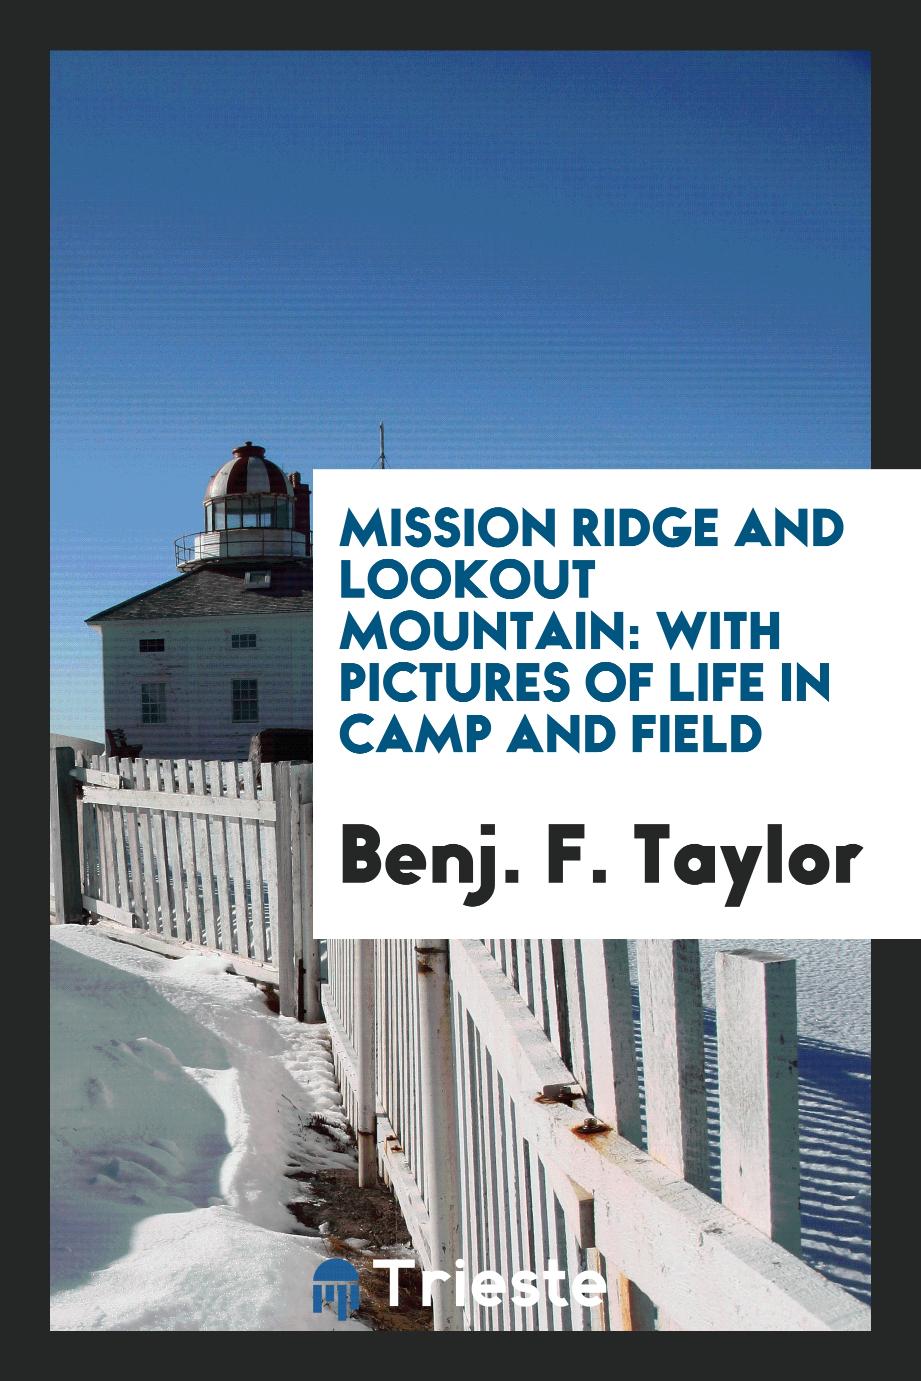 Mission Ridge and Lookout Mountain: with pictures of life in camp and field